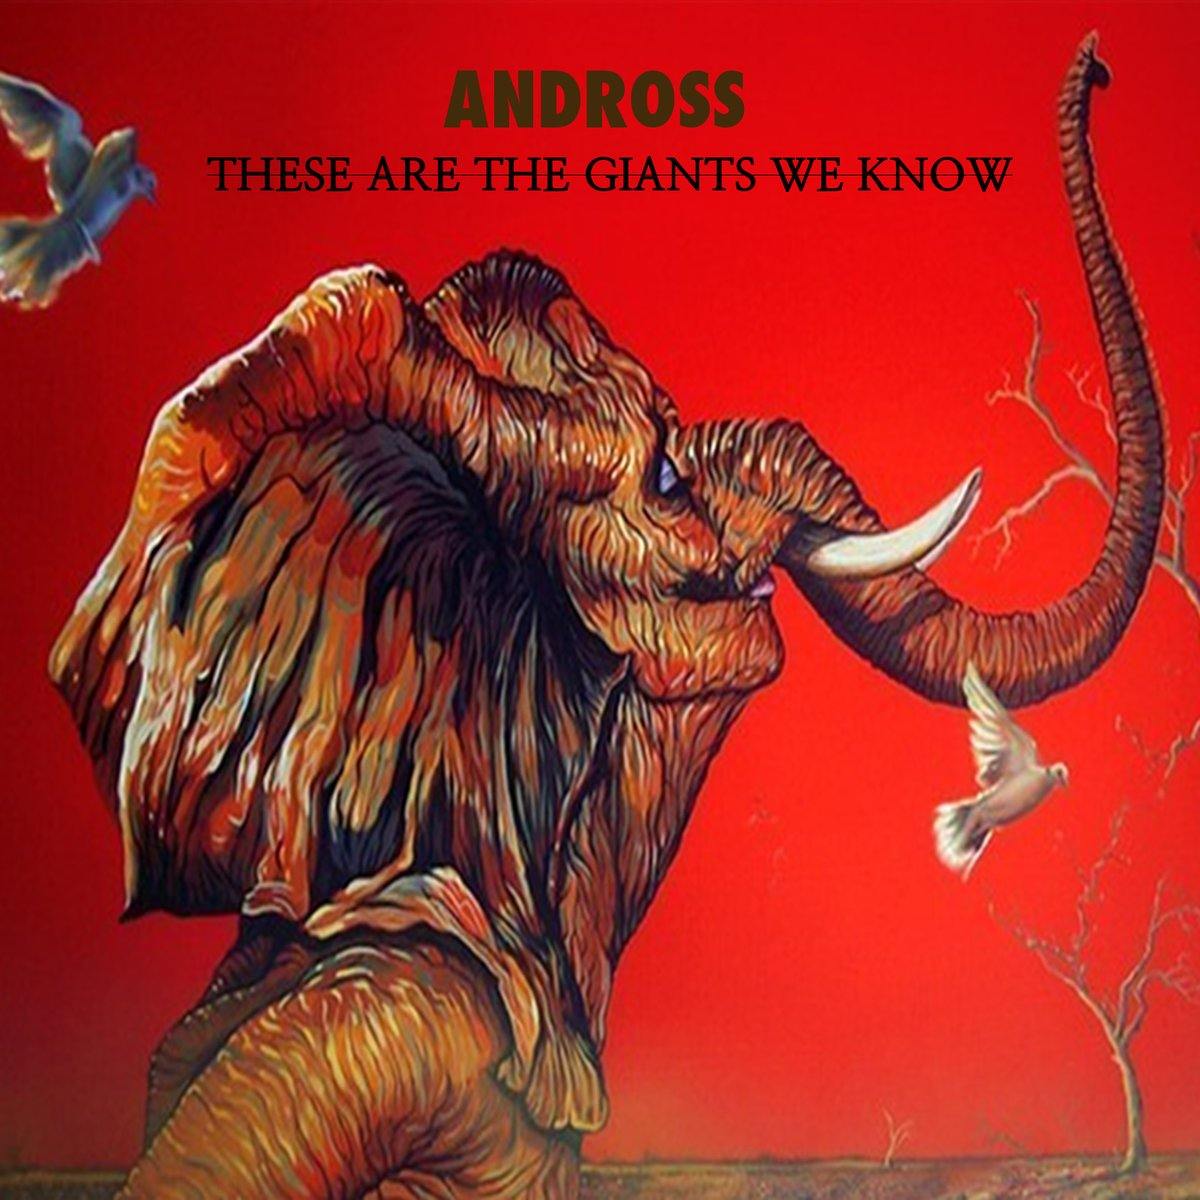 Buy – Andross "These Are The Giants We Know" CD – Band & Music Merch – Cold Cuts Merch